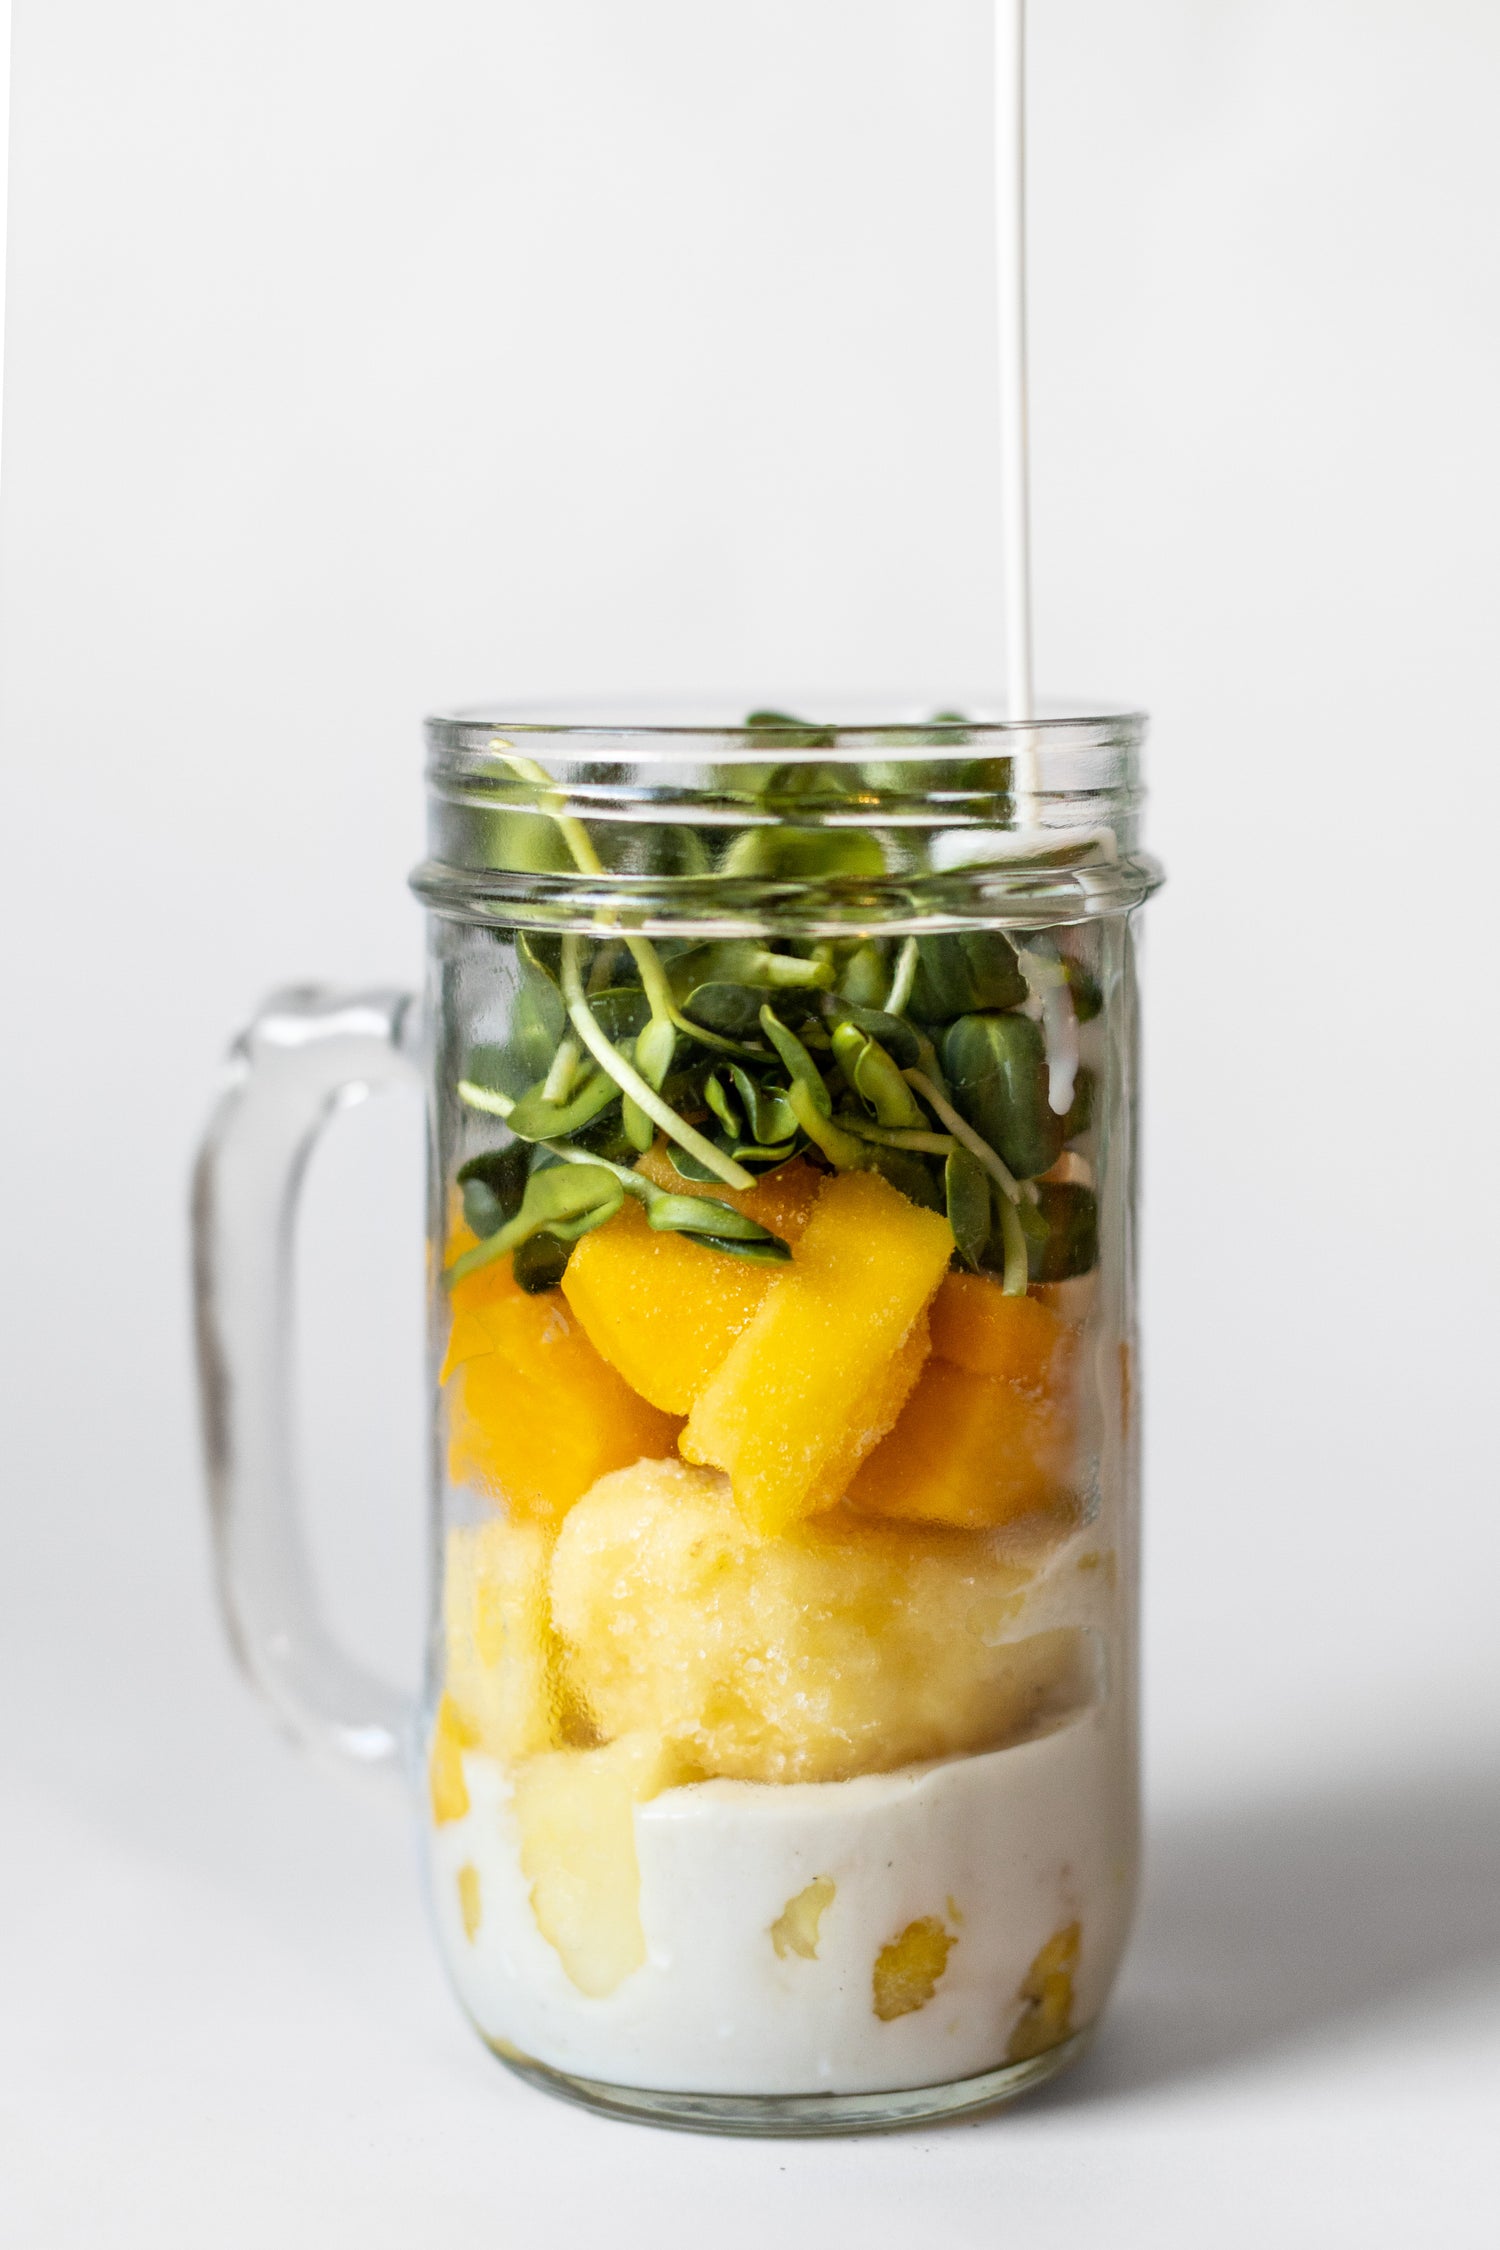 Image of smoothie cup against a white background. Milk, bananas, mango, and microgreens are layered in the cup.